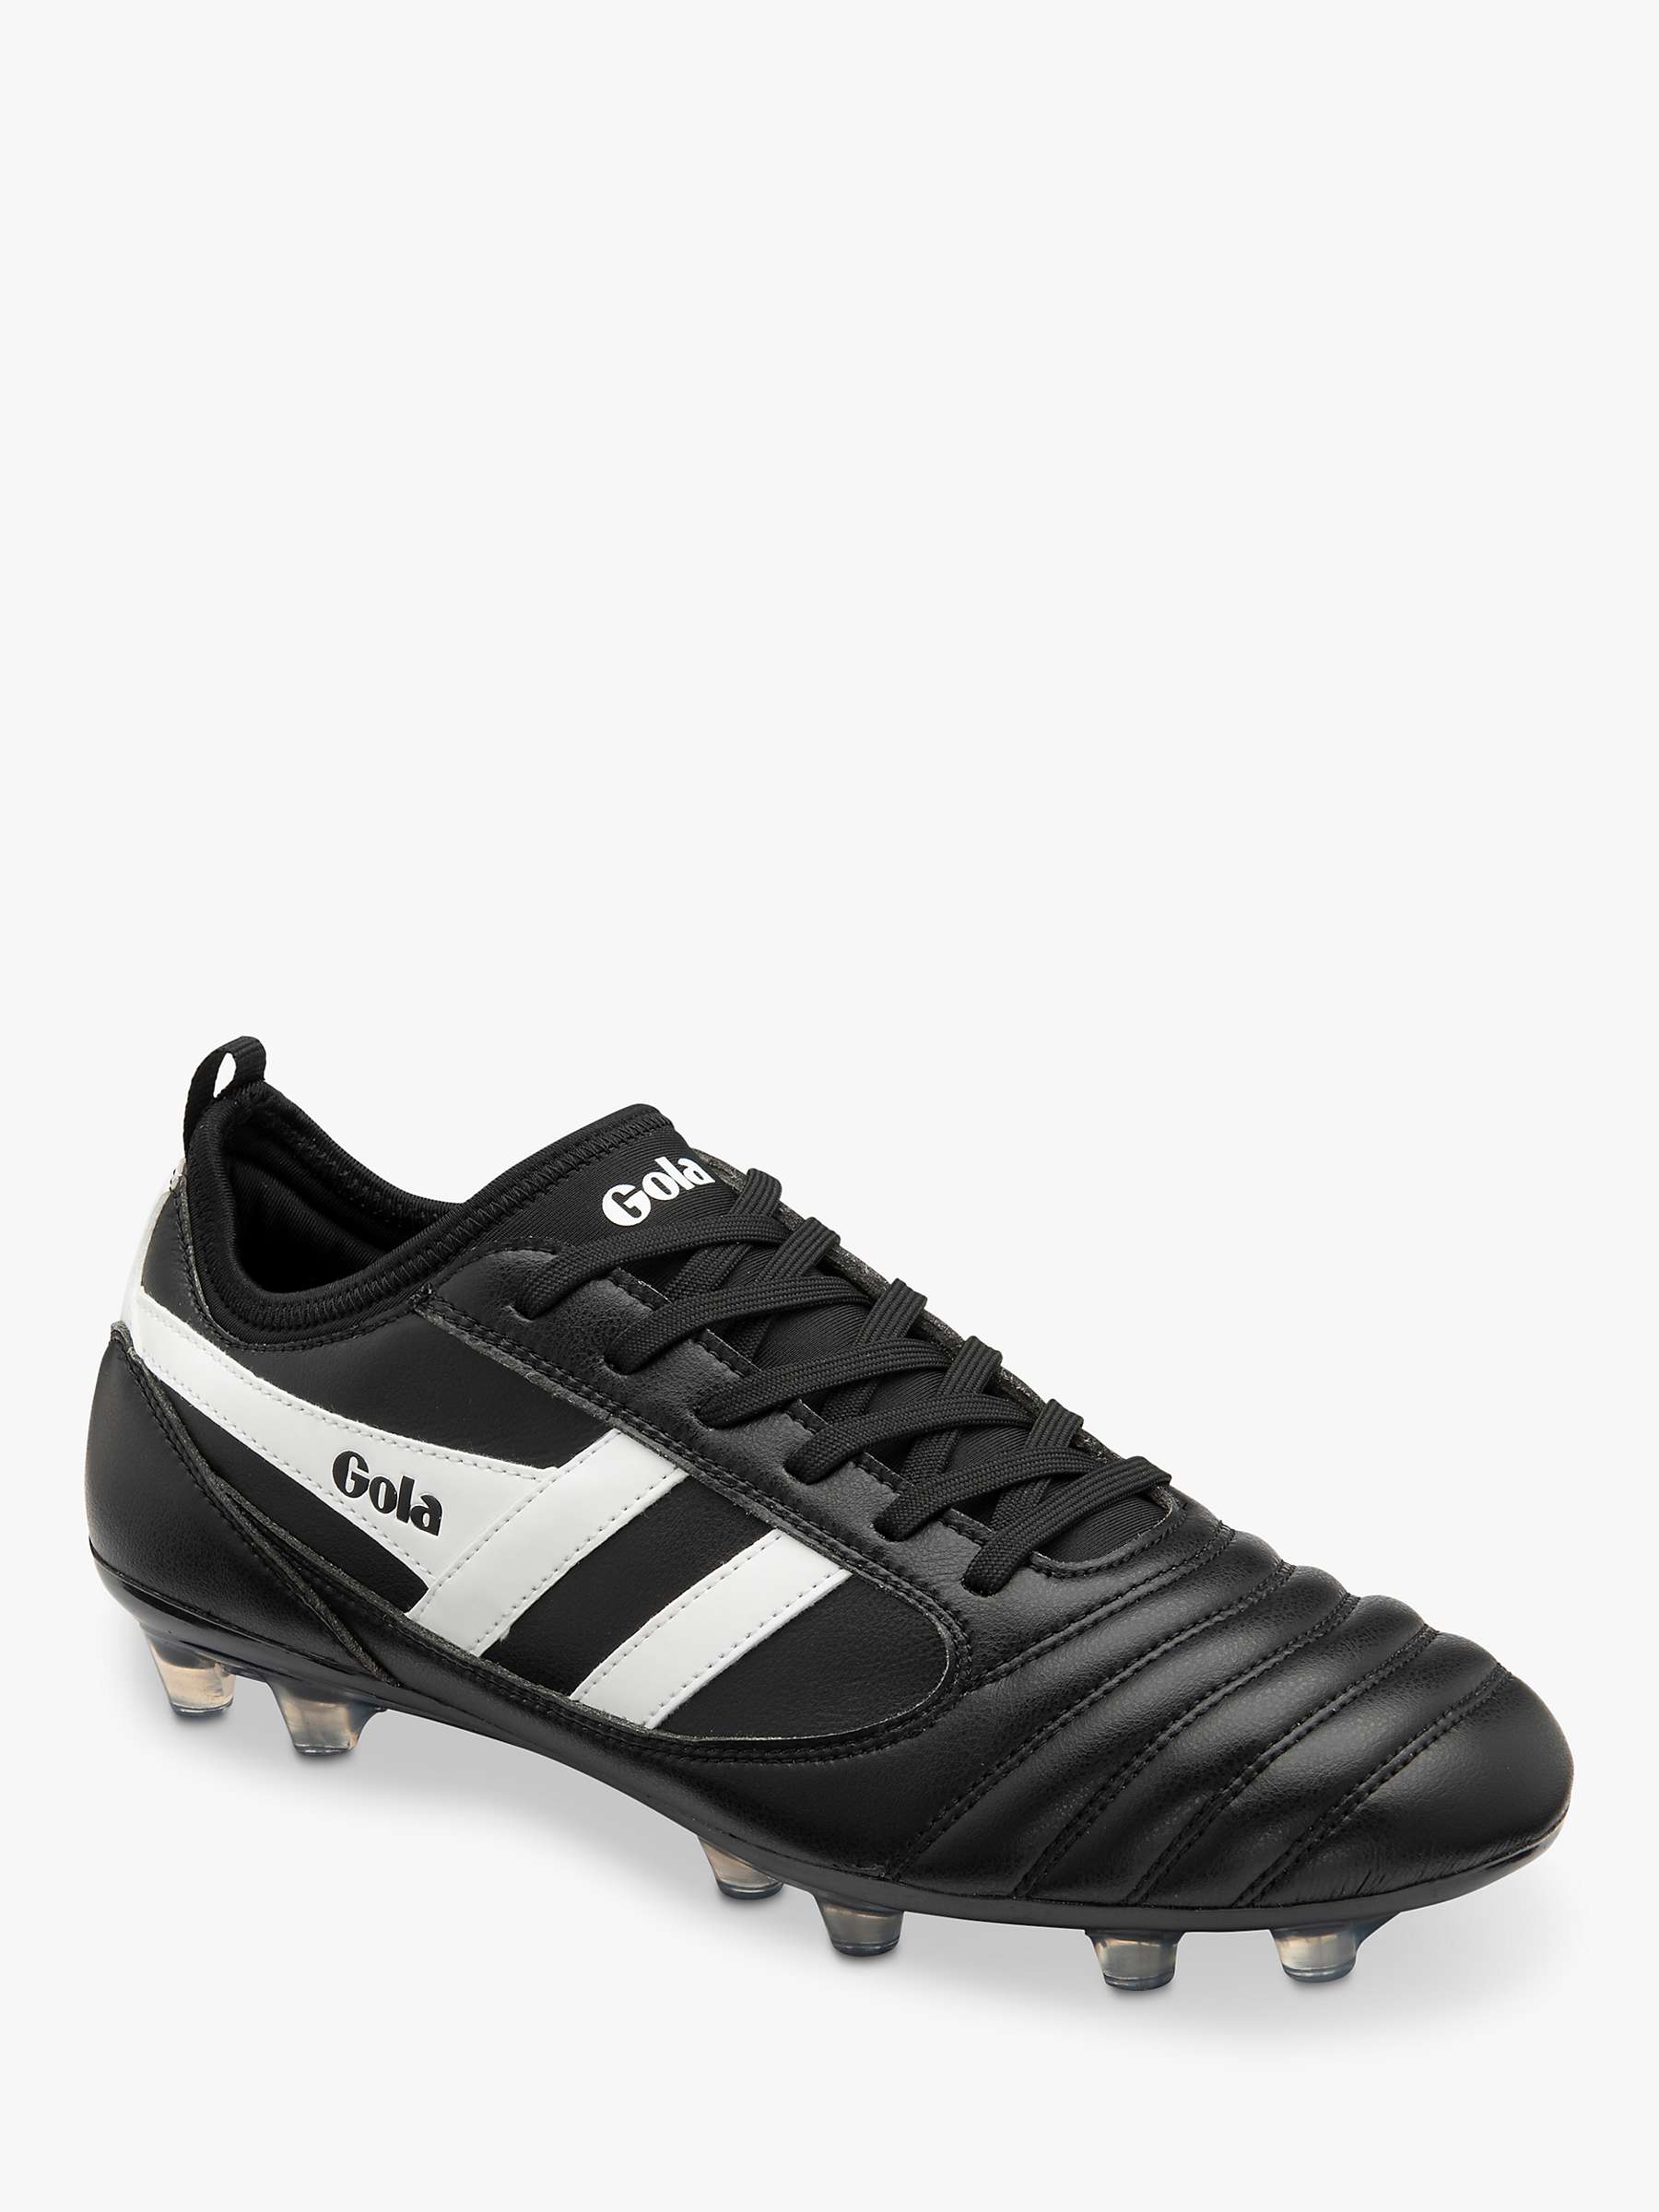 Buy Gola Performance Ceptor MLD Pro Football Boots, Black/White Online at johnlewis.com